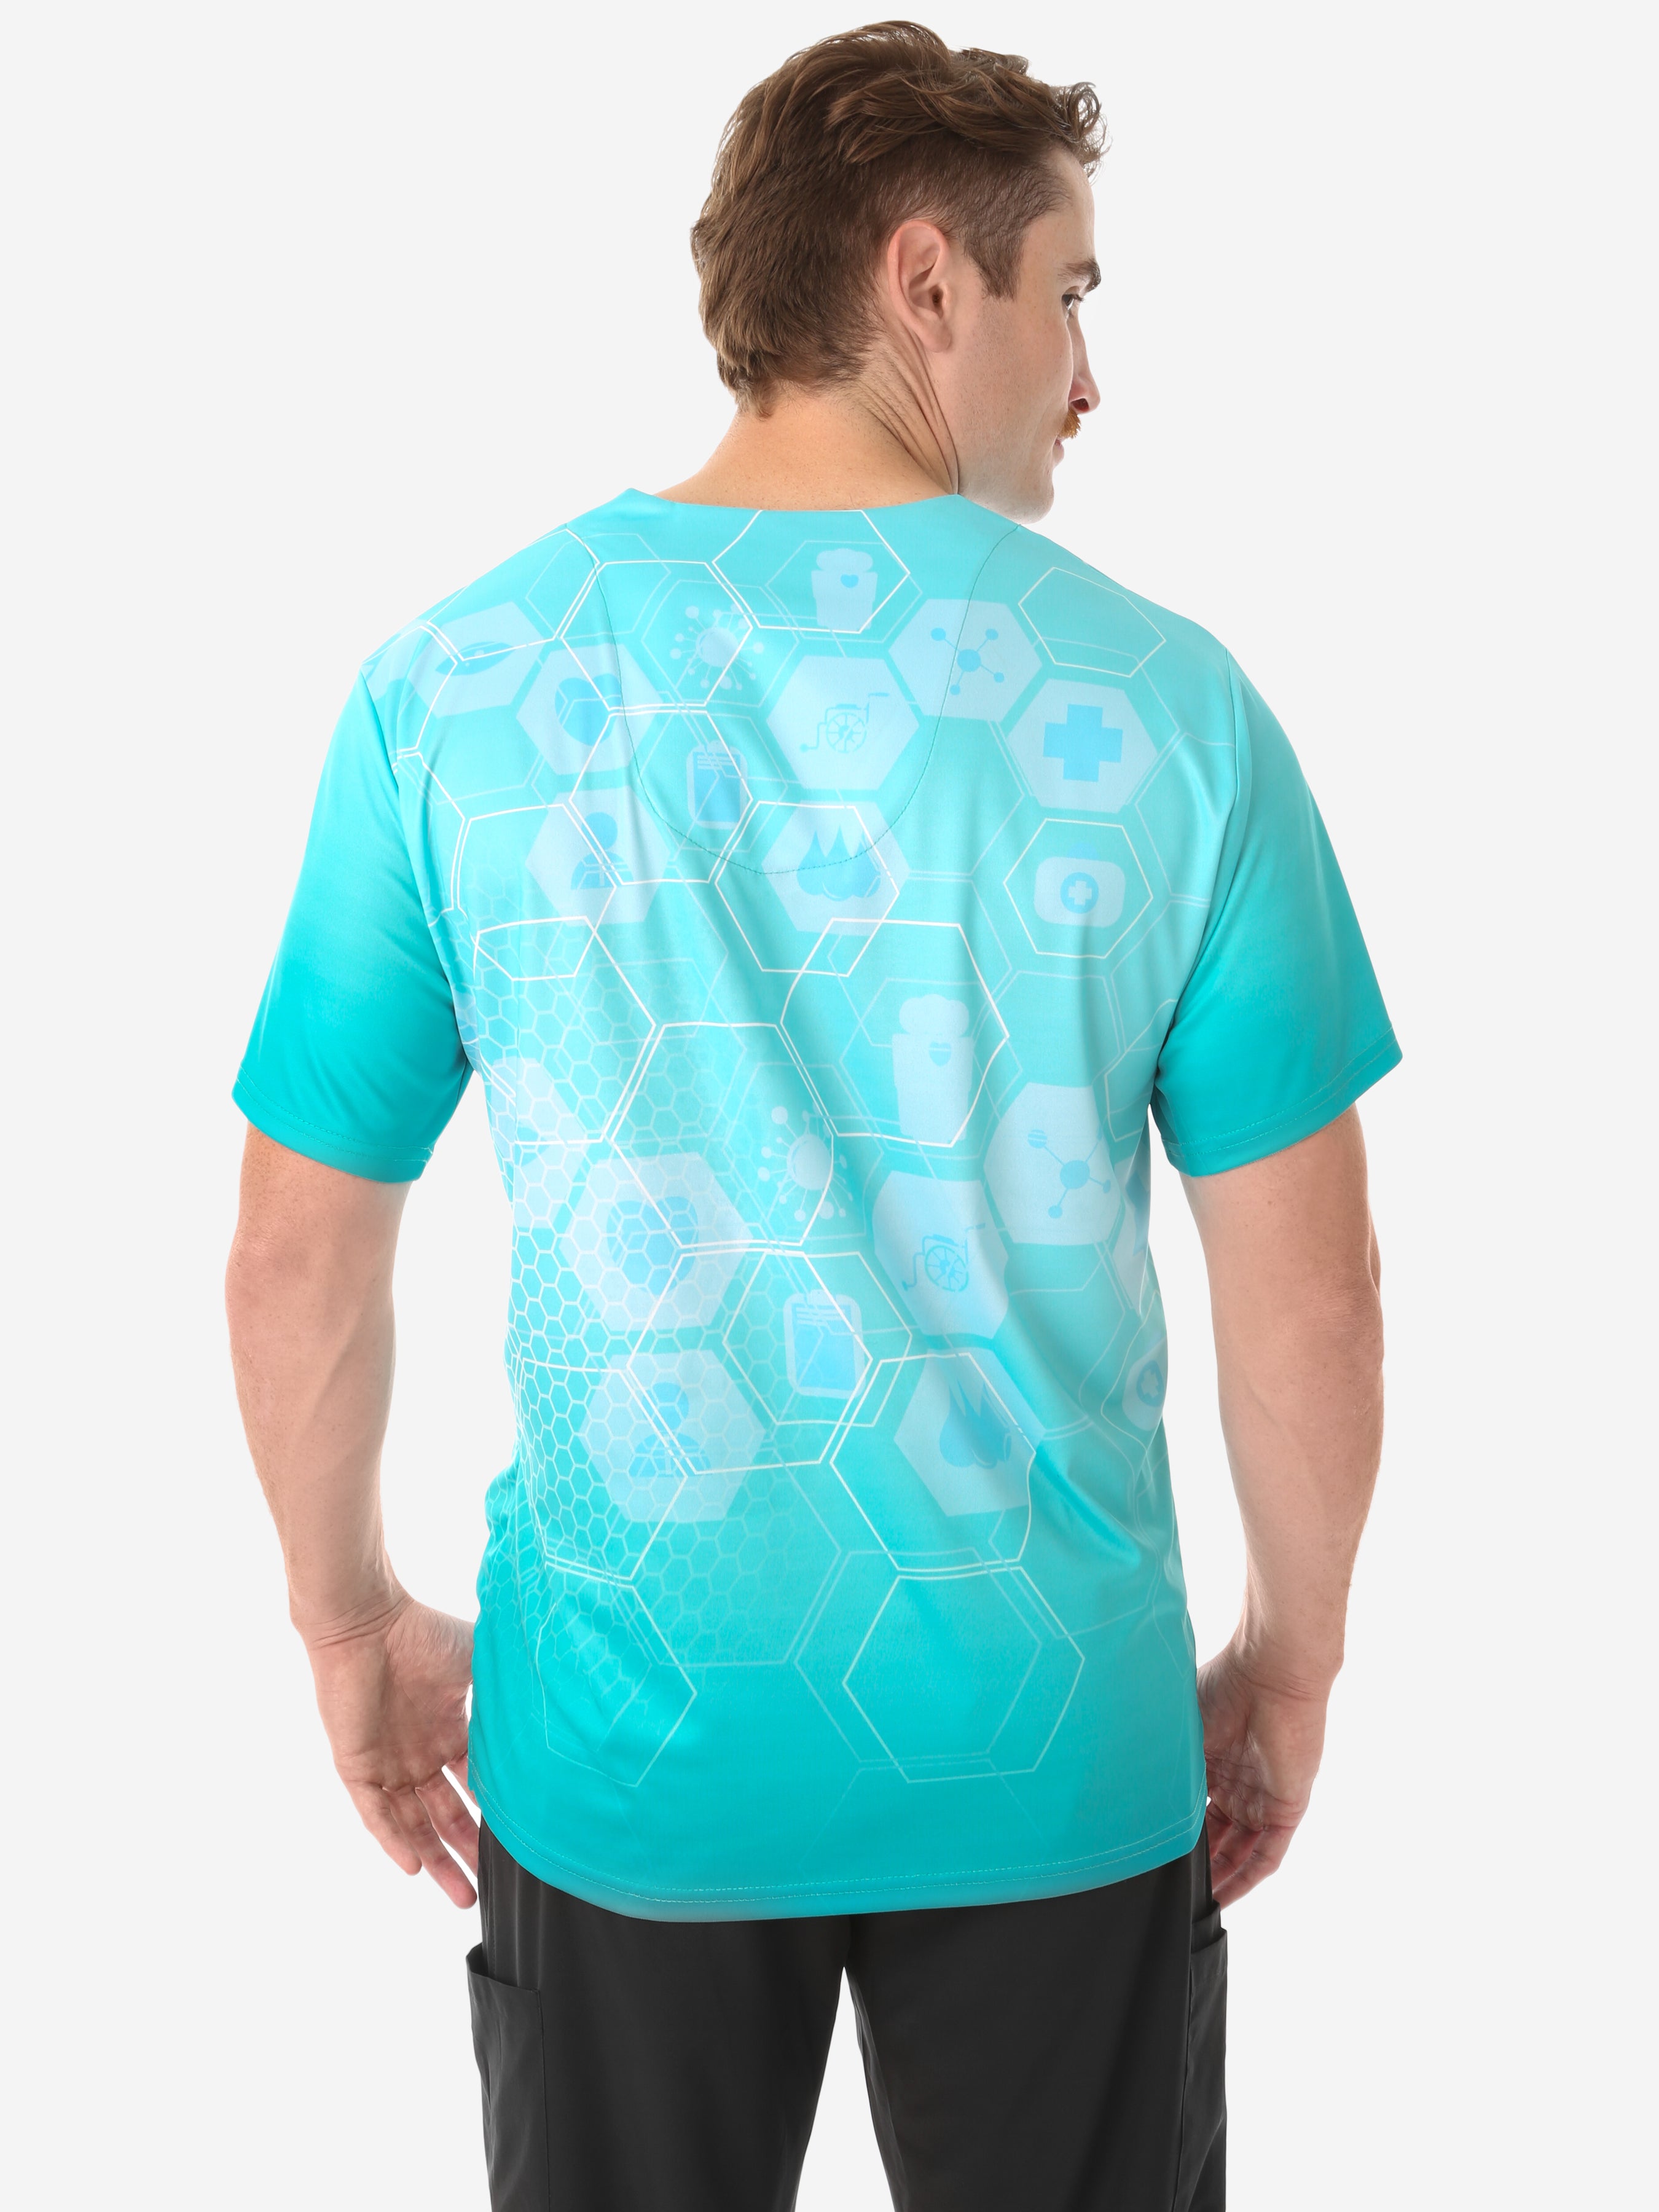 Men's The University of Kansas Health System Scrub Top Design Contest Winner You Matter We Care Top Only Back View